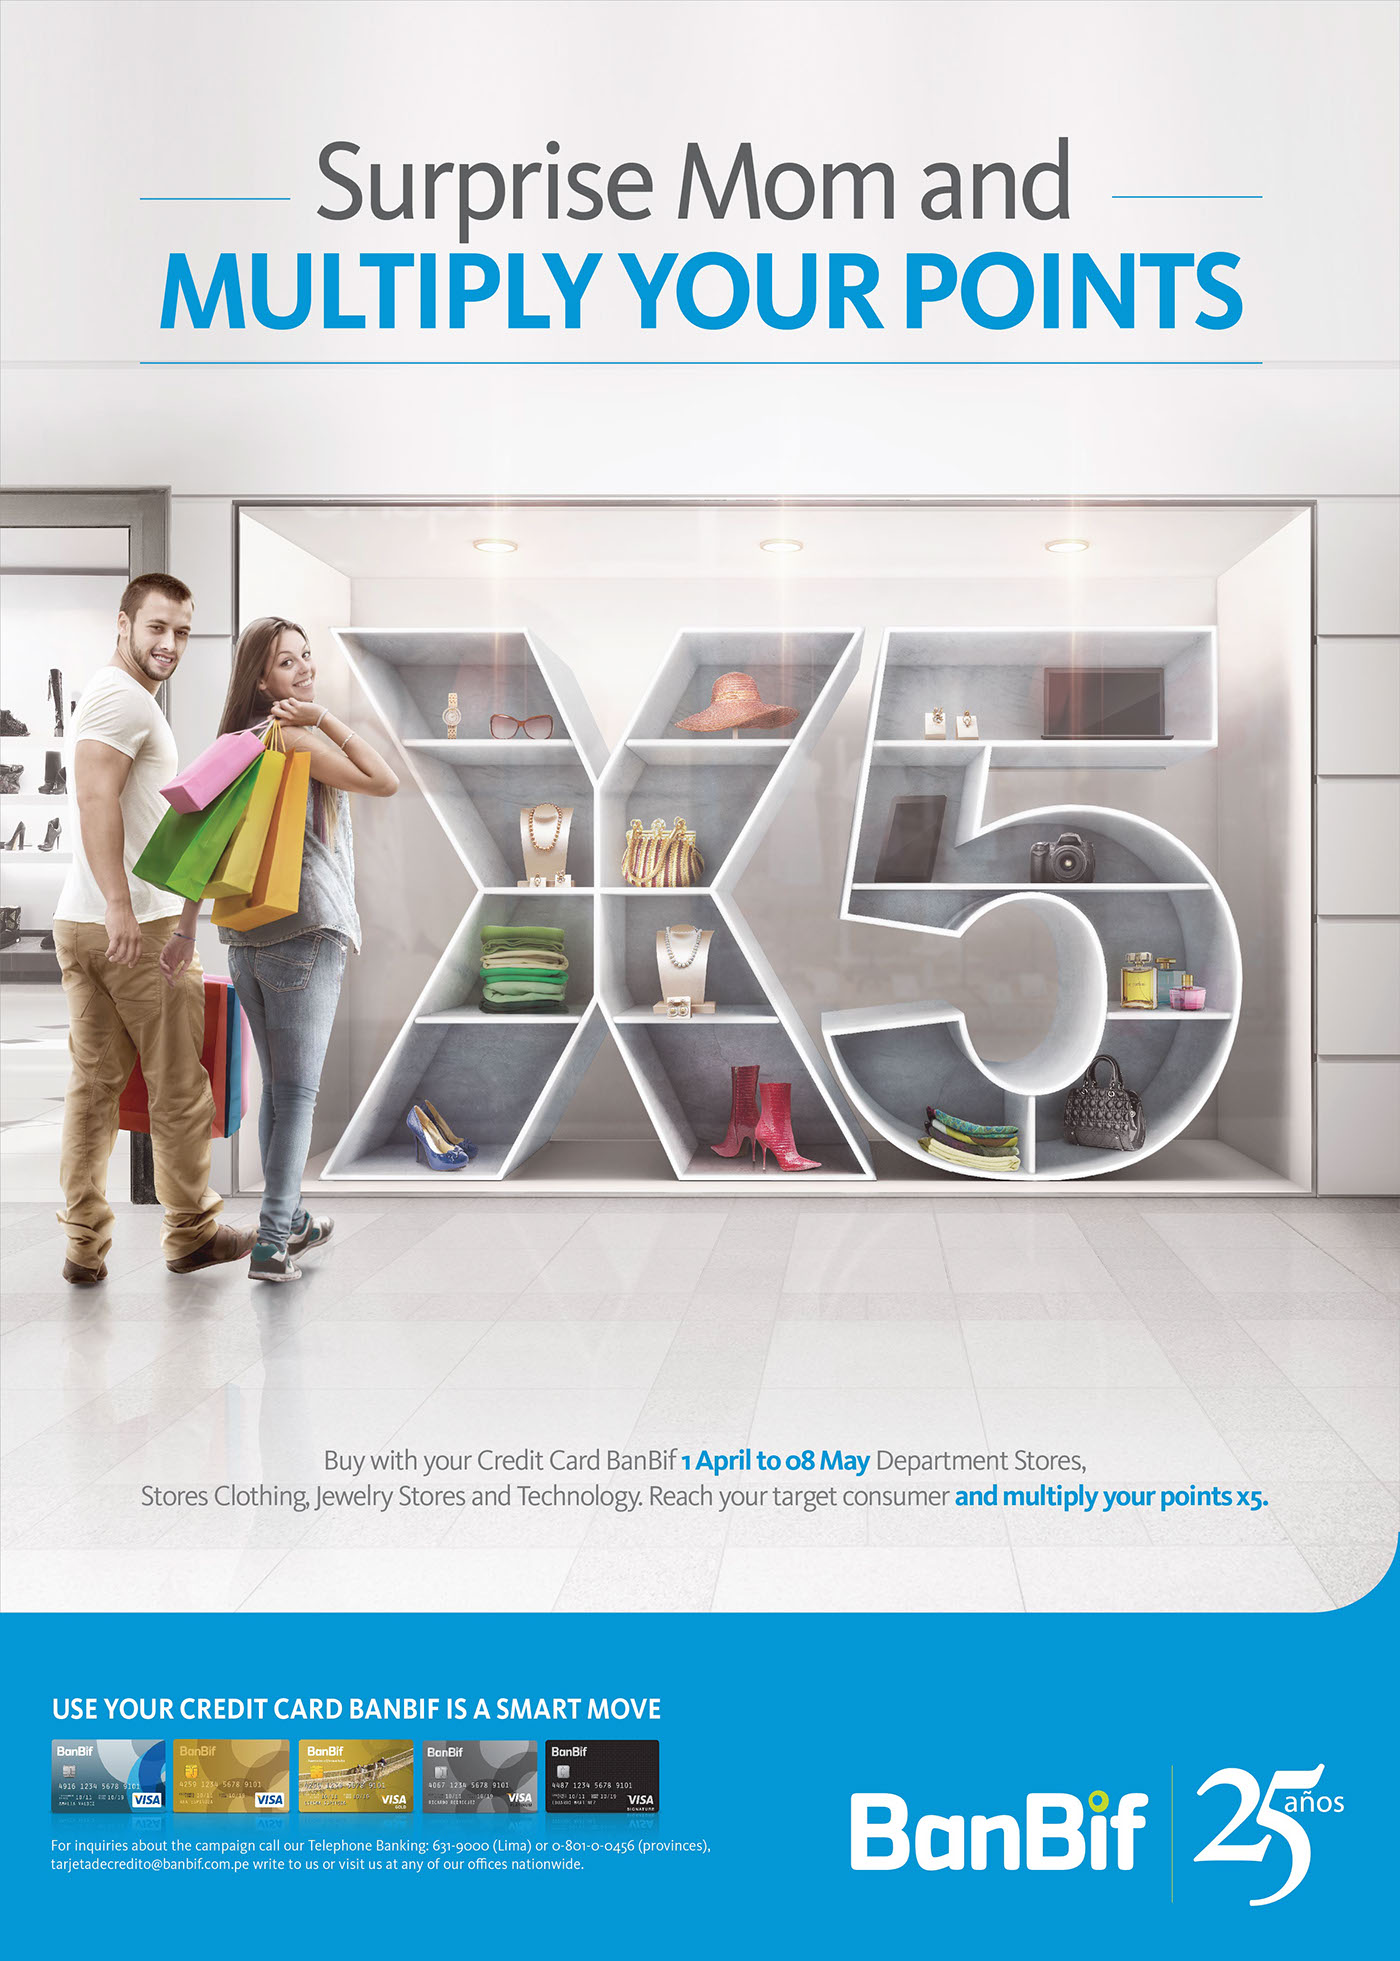 X5 stores multiply your points credit card jewelry stores Technology mon day